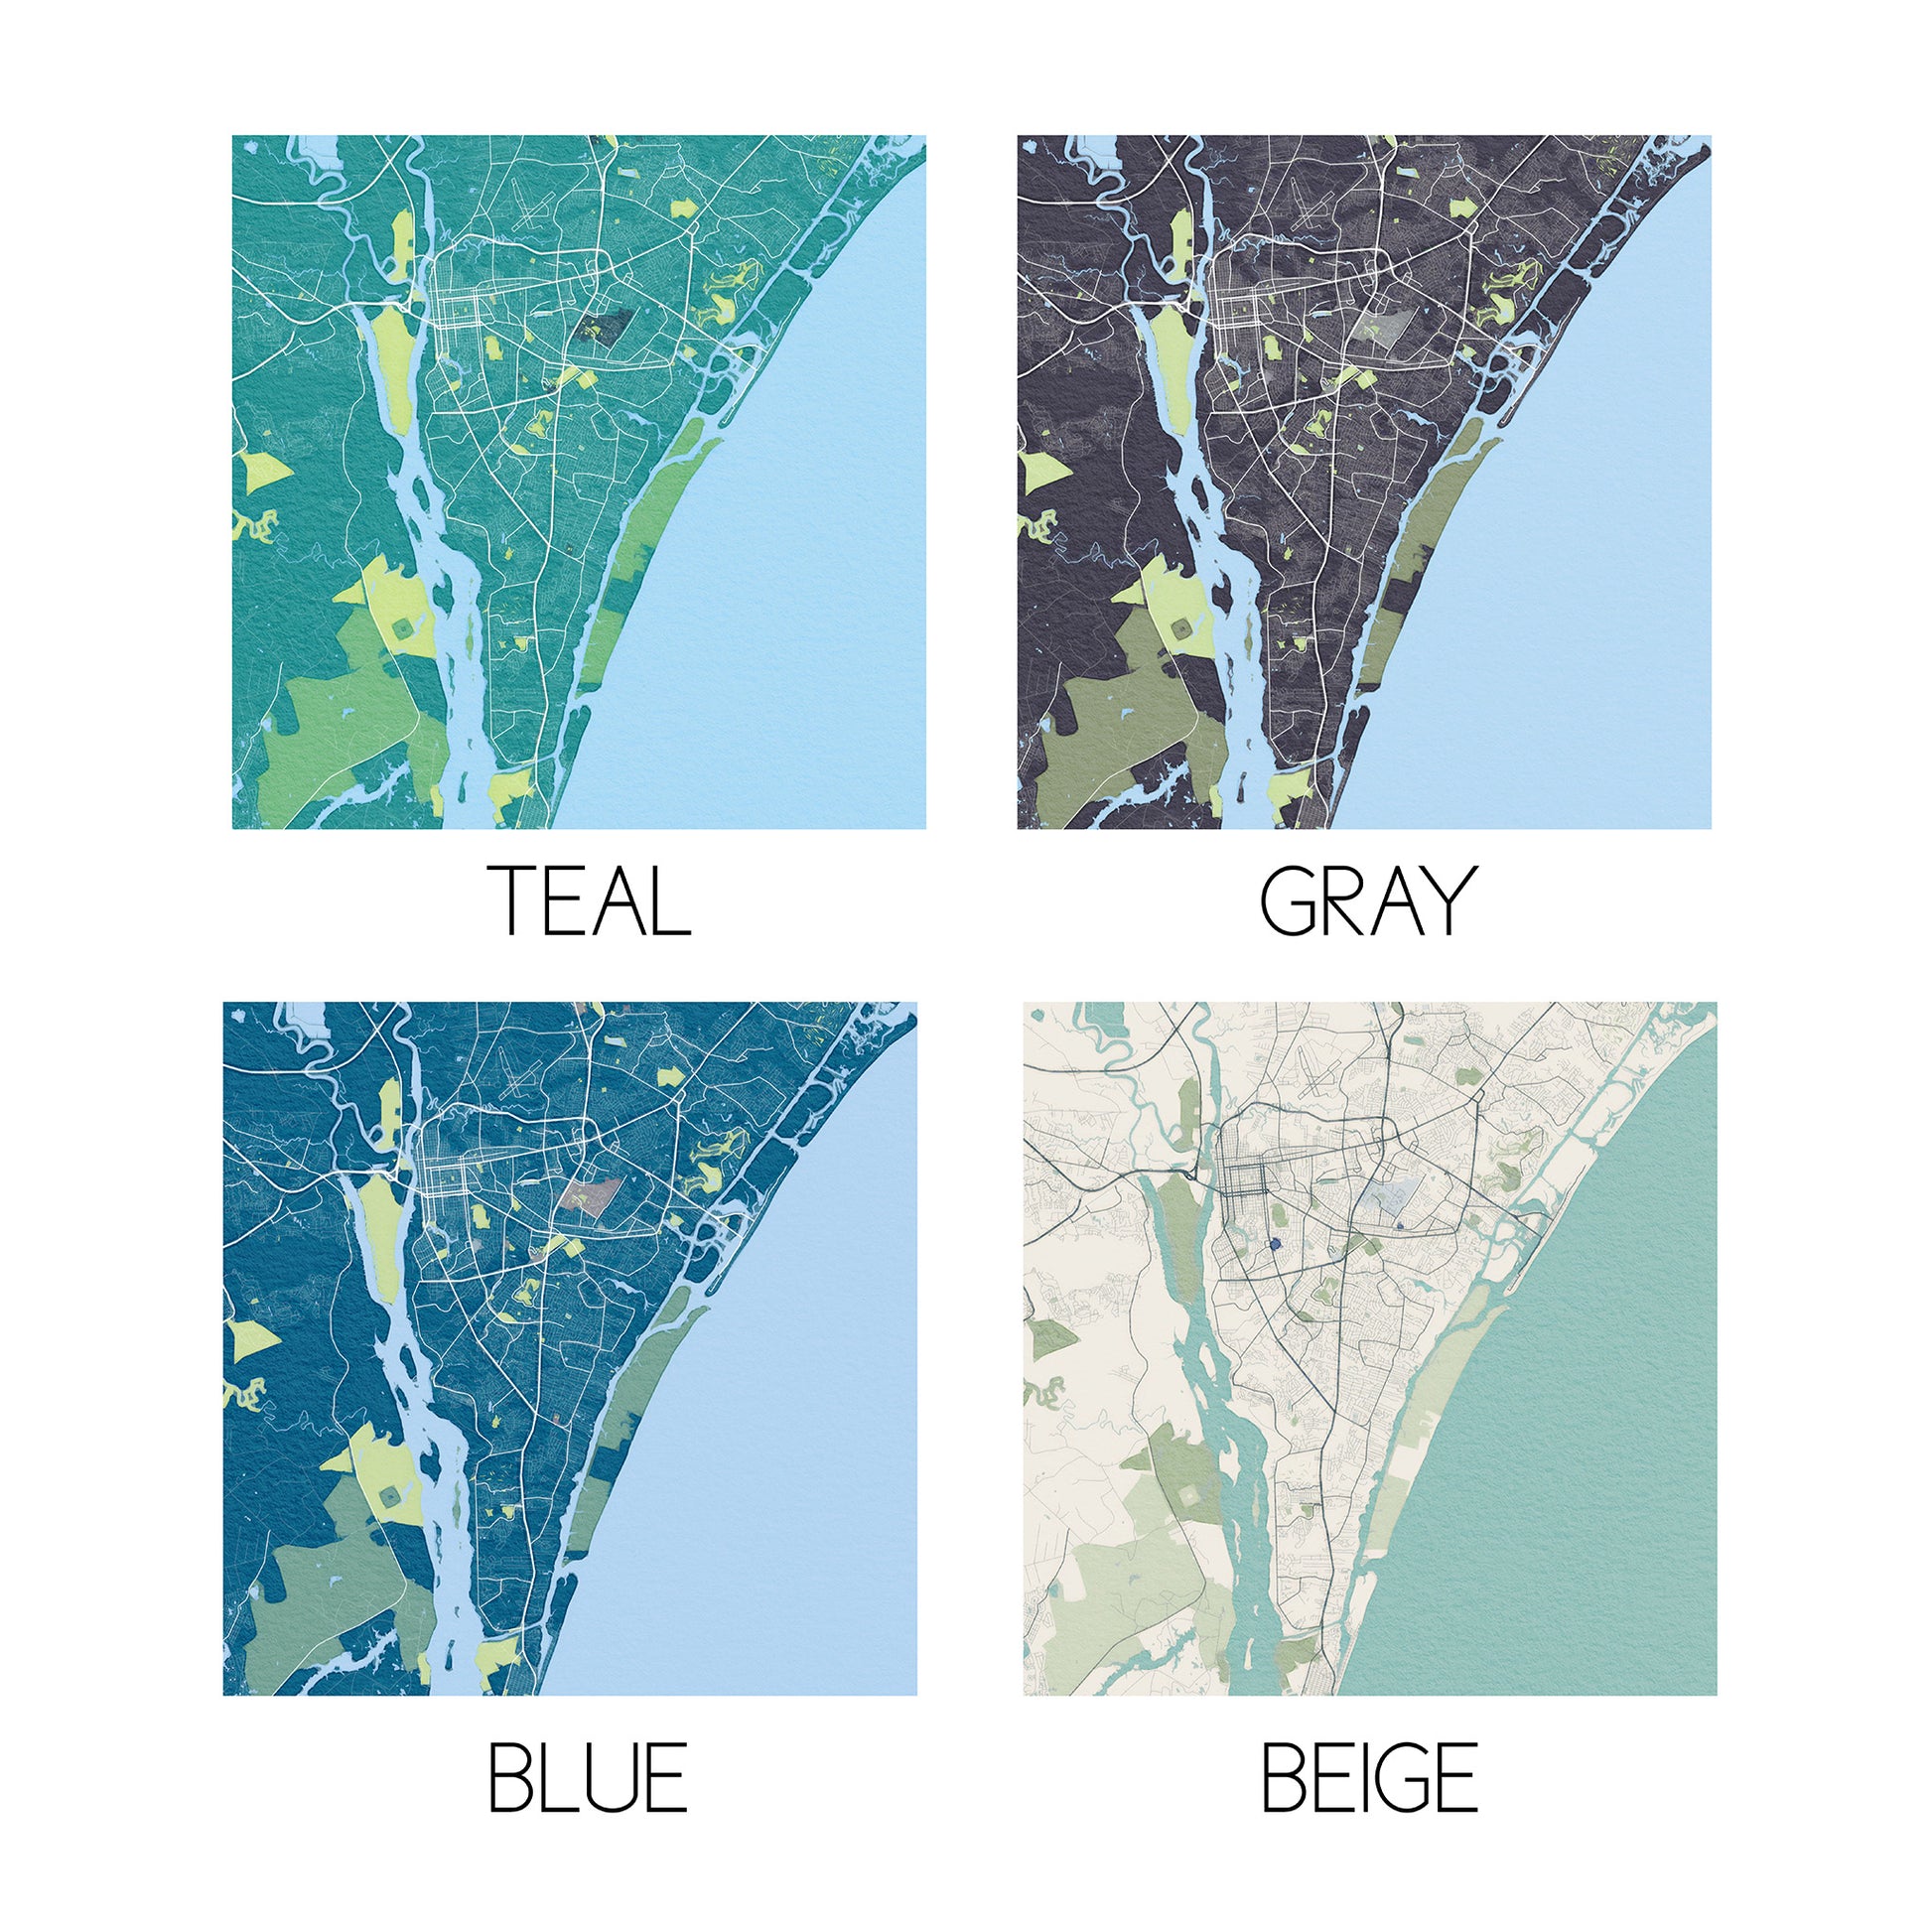 Examples of all four colors available for city maps: teal, gray, blue, and beige